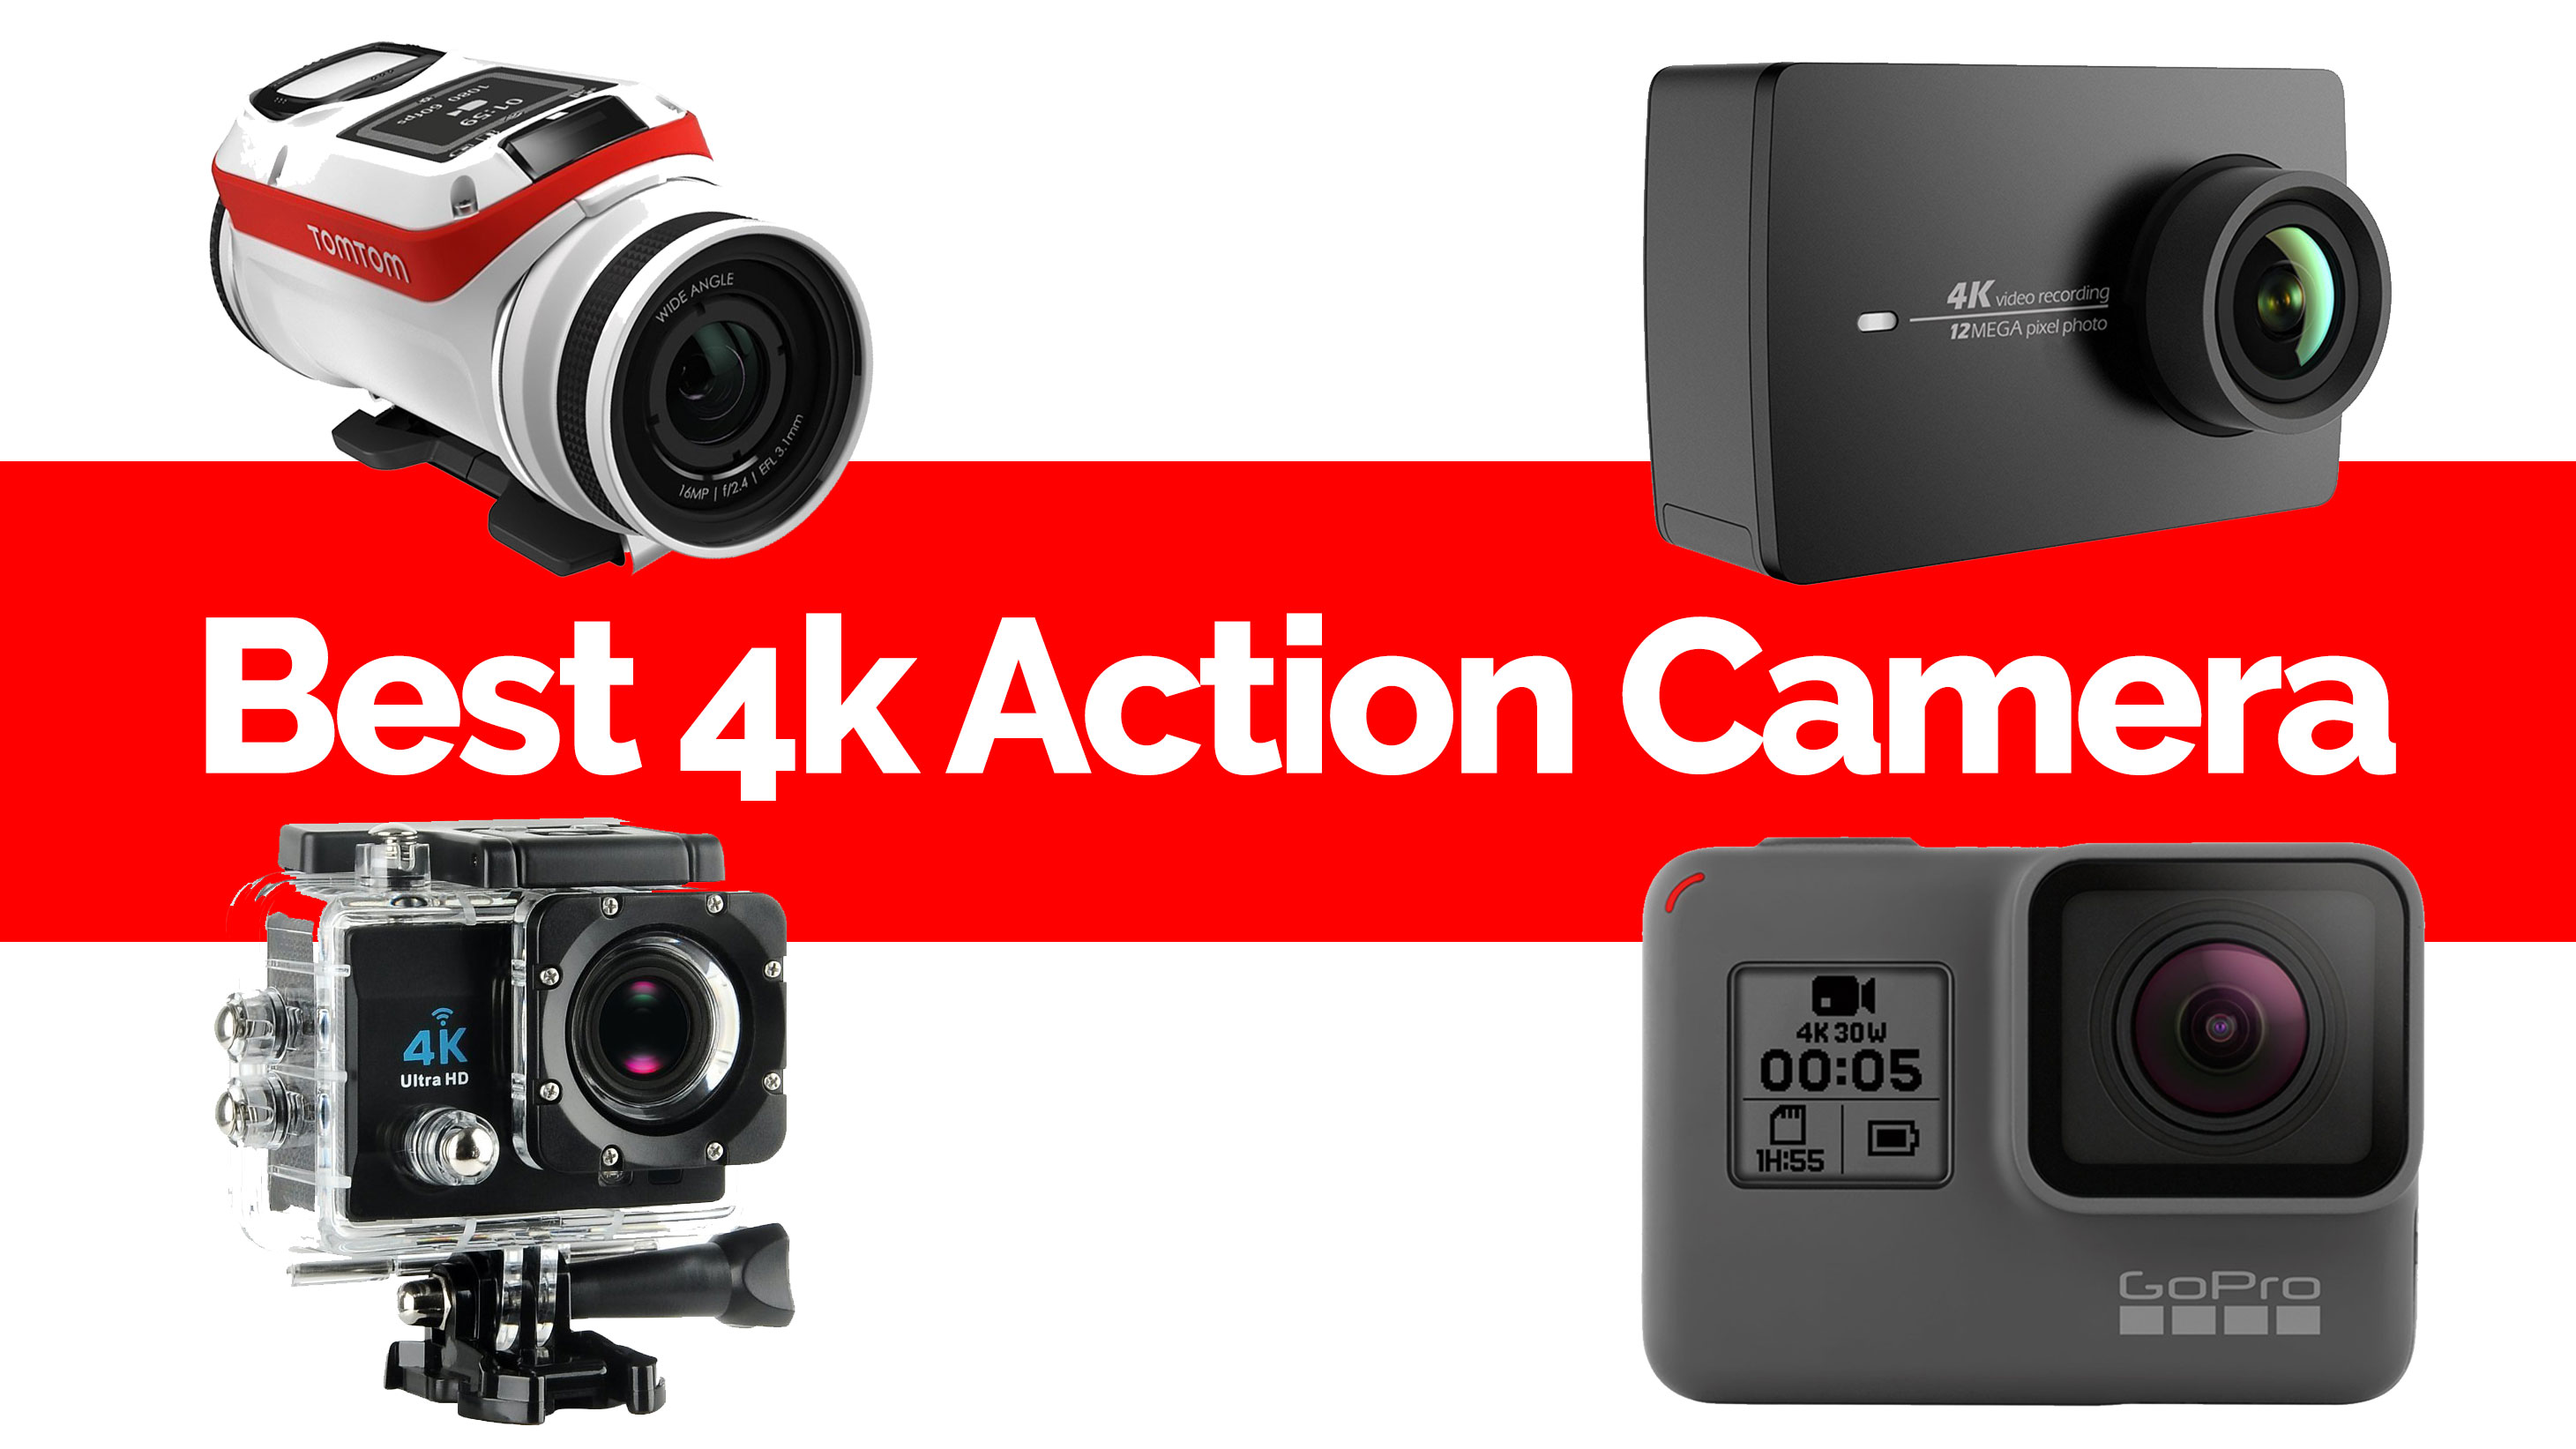 9 Best 4K Action Cameras The Ultimate Guide (2018)